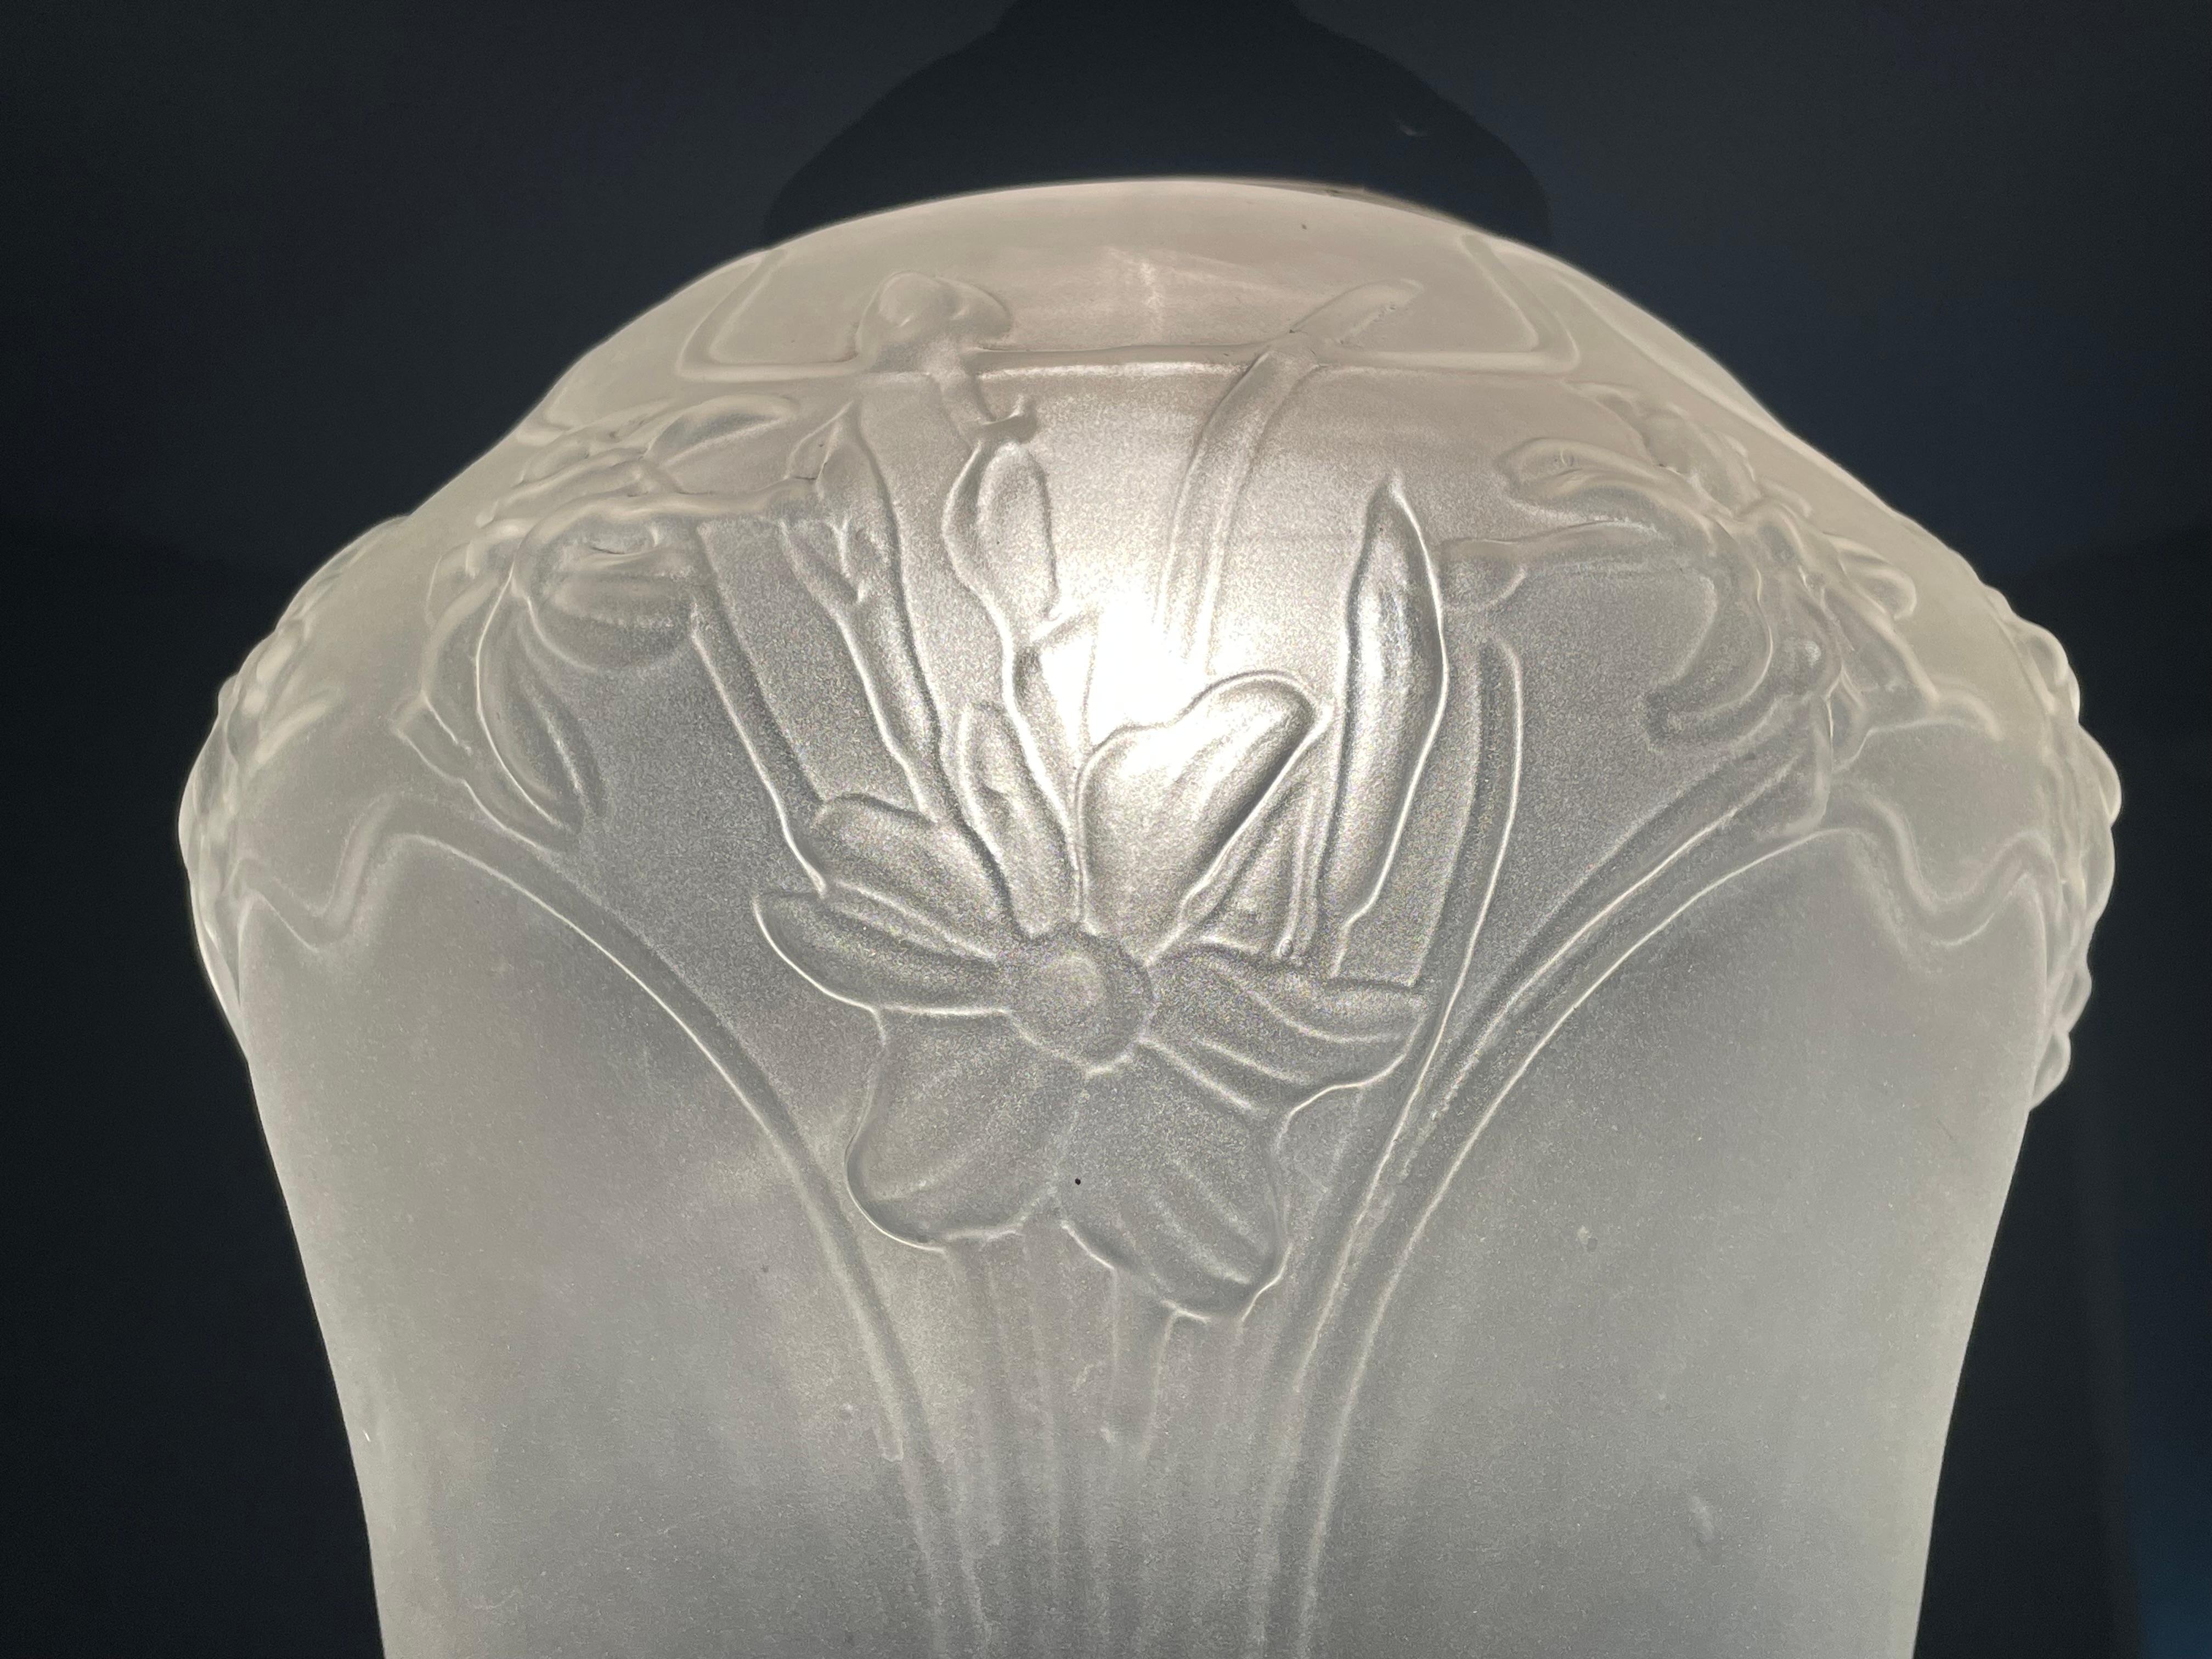 European Original Arts and Crafts Glass Hallway Pendant Light with Daffodil Flowers 1900s For Sale